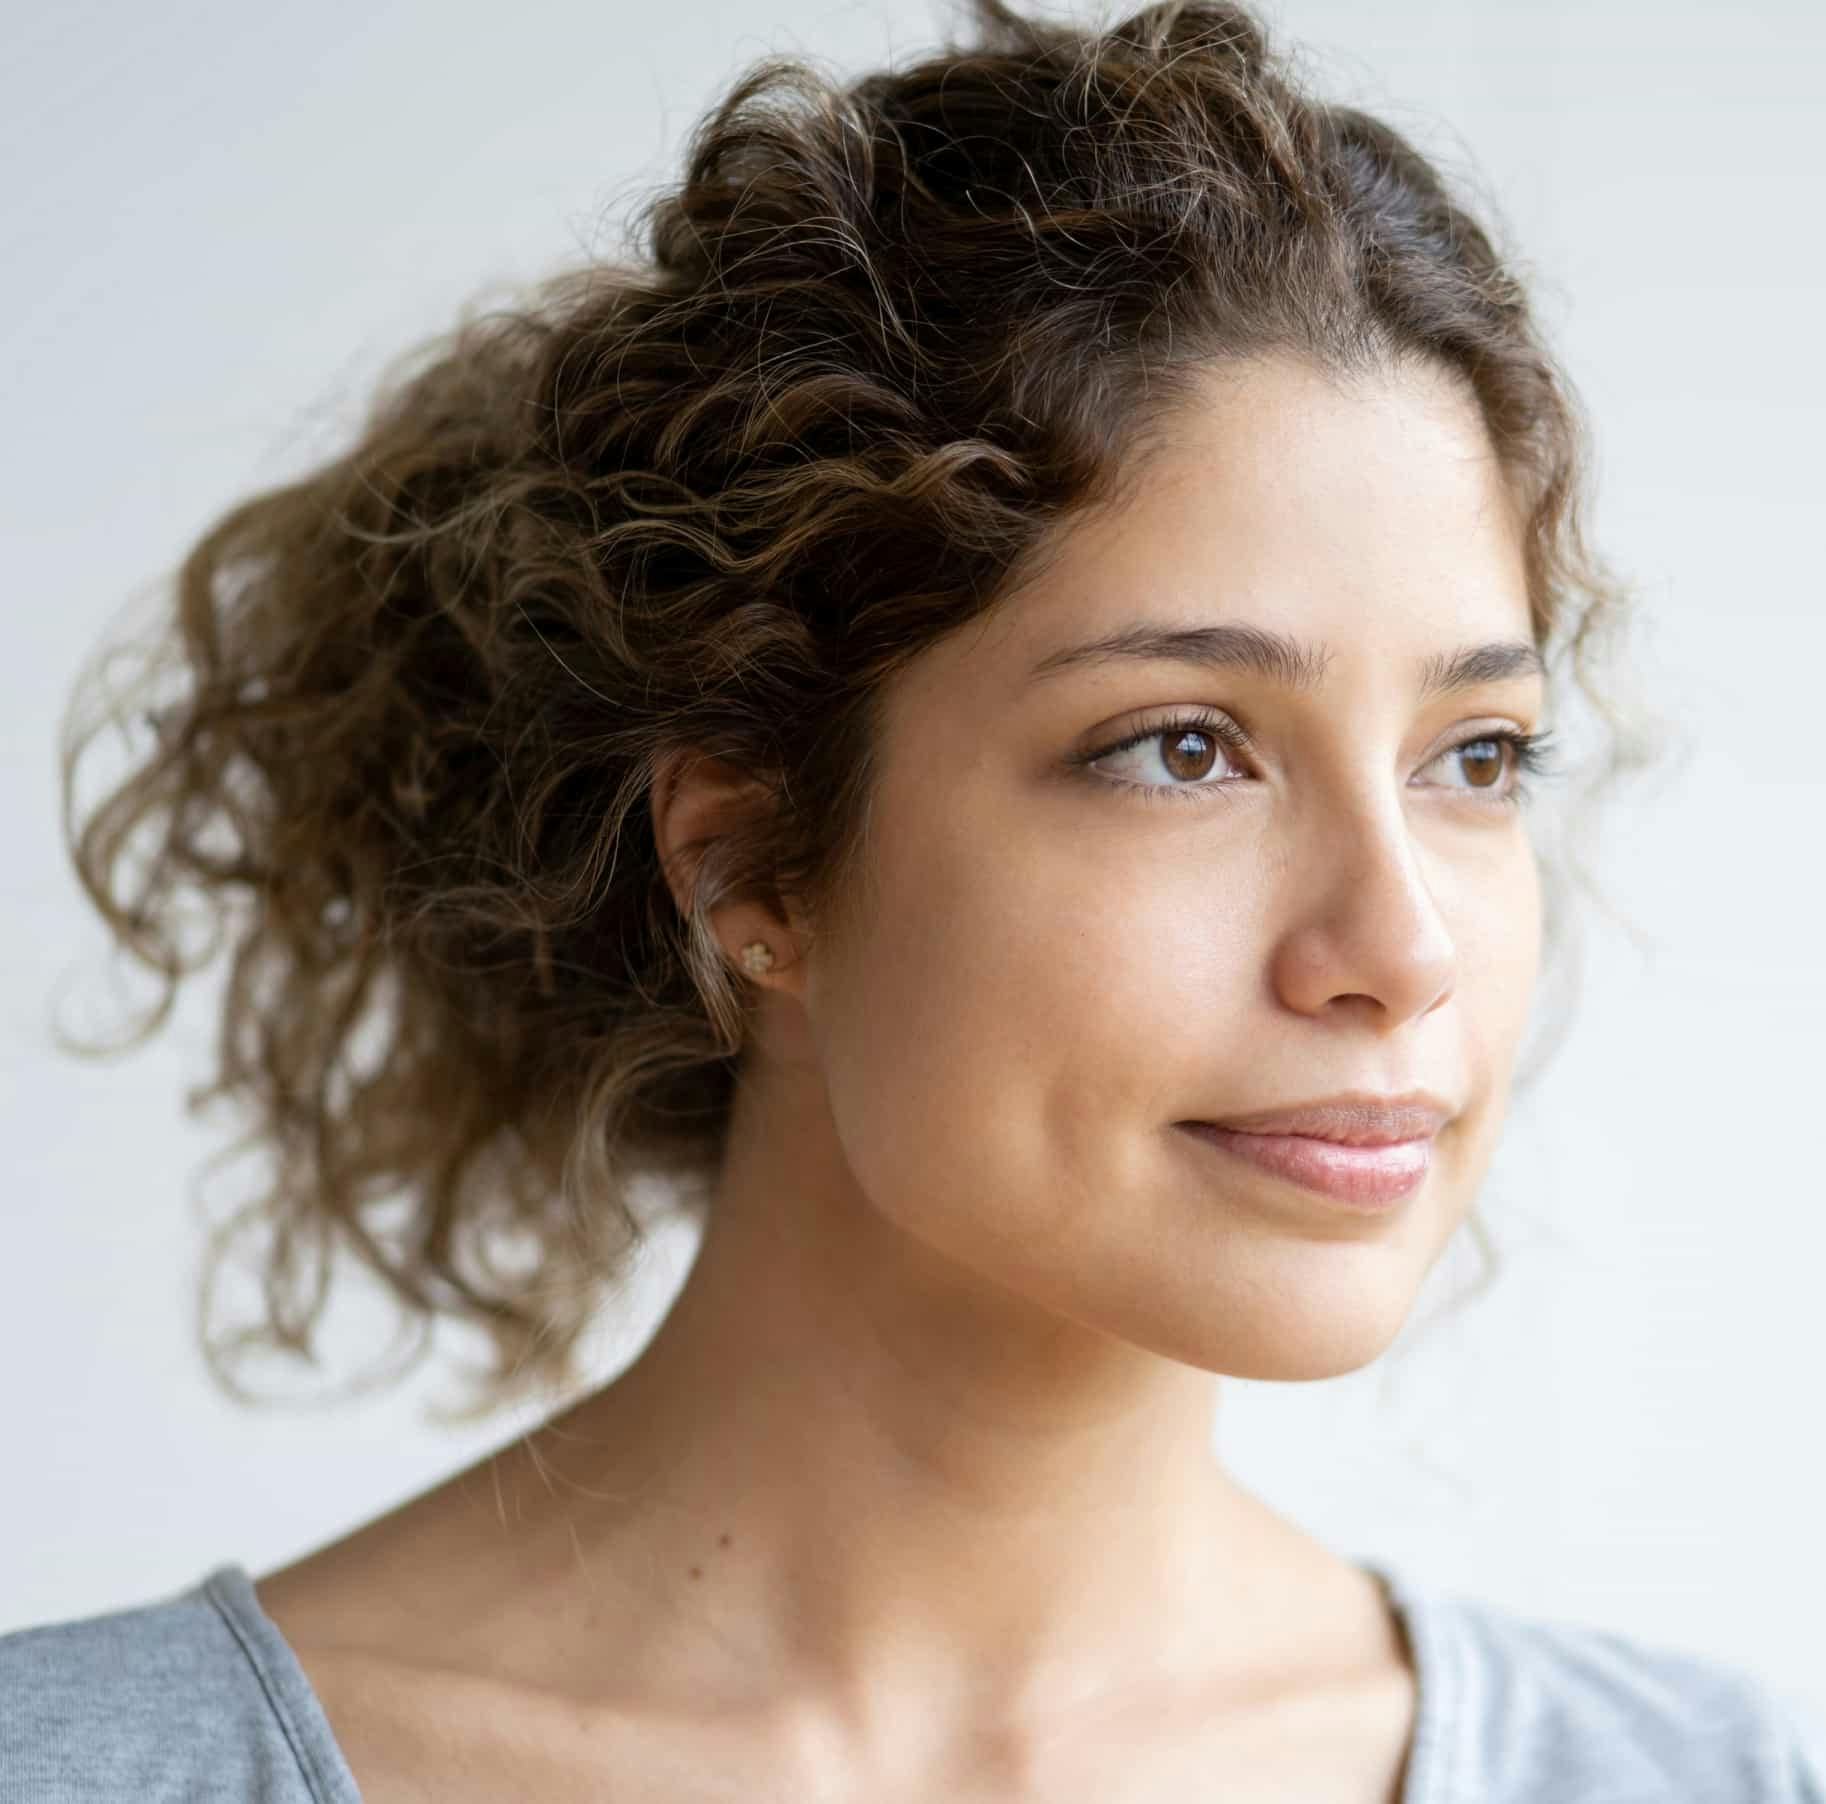 Woman with curly brown hair